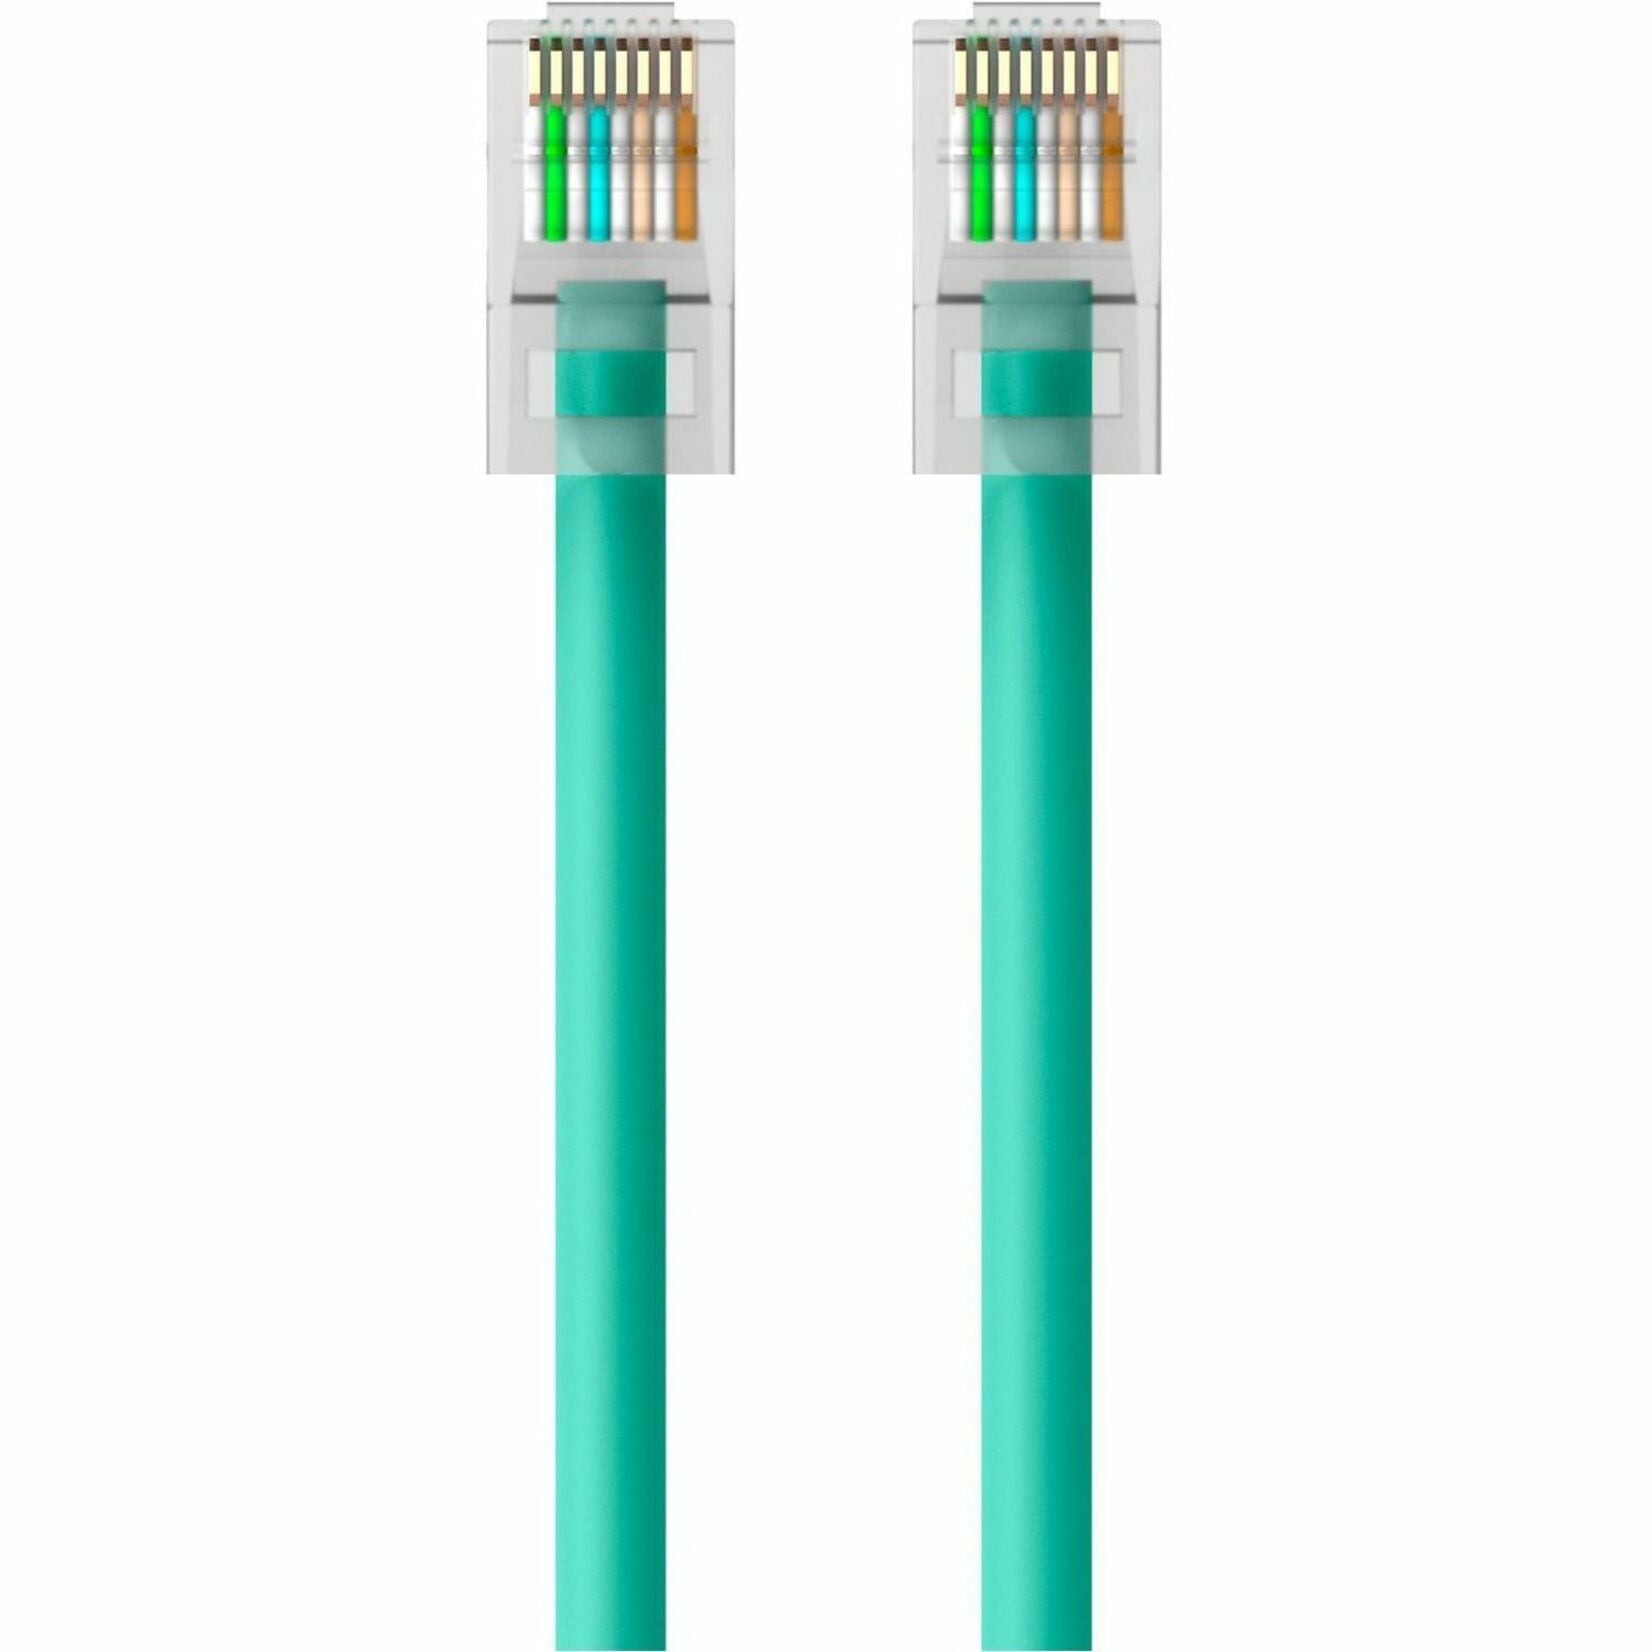 Belkin A3L980-15-GRN RJ45 Category 6 Snagless Patch Cable, 15ft, Green